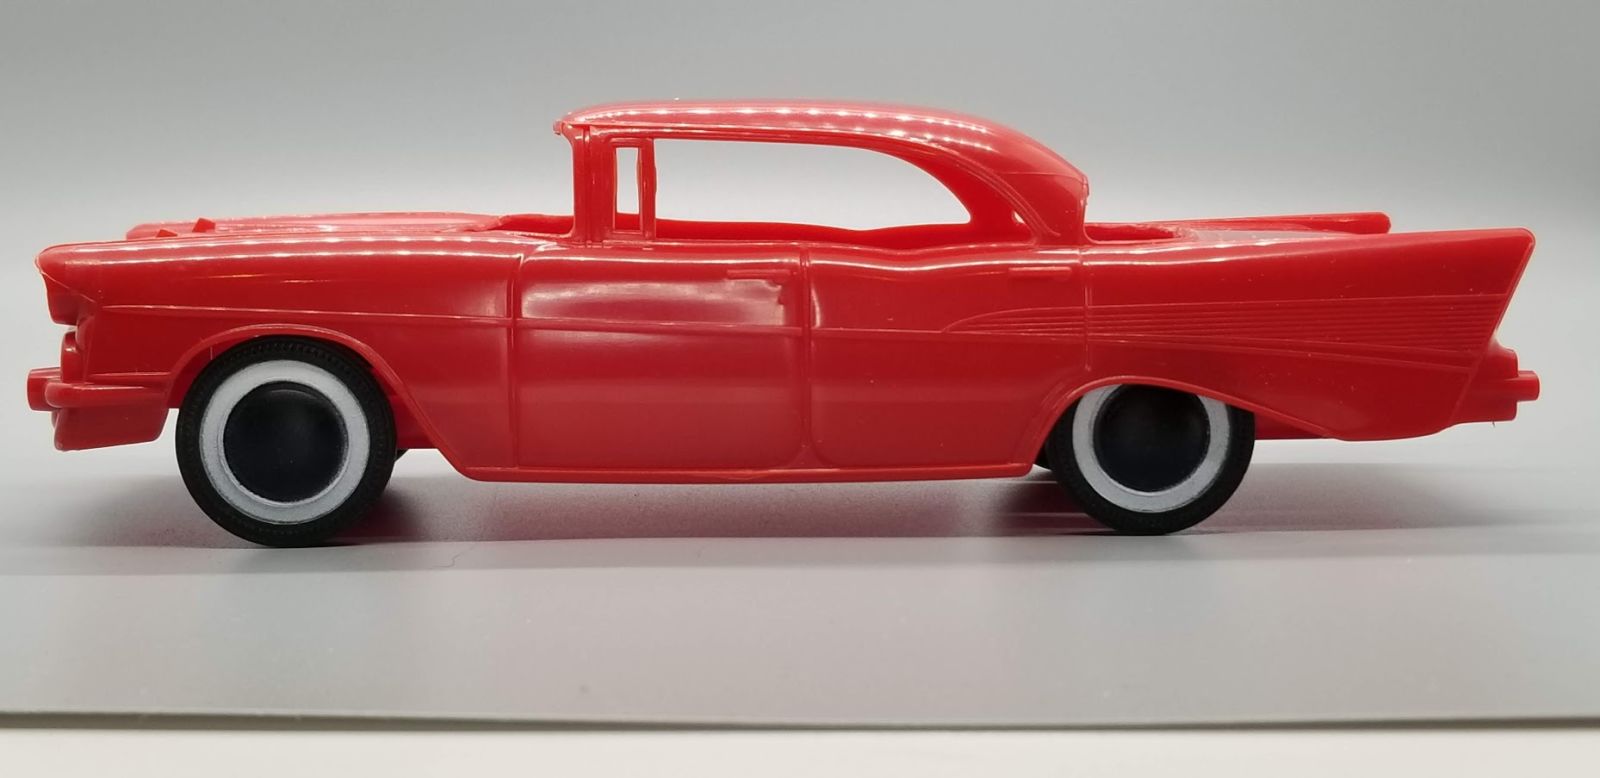 Illustration for article titled 1/24: 1957 Chevy 4-door Hard Top